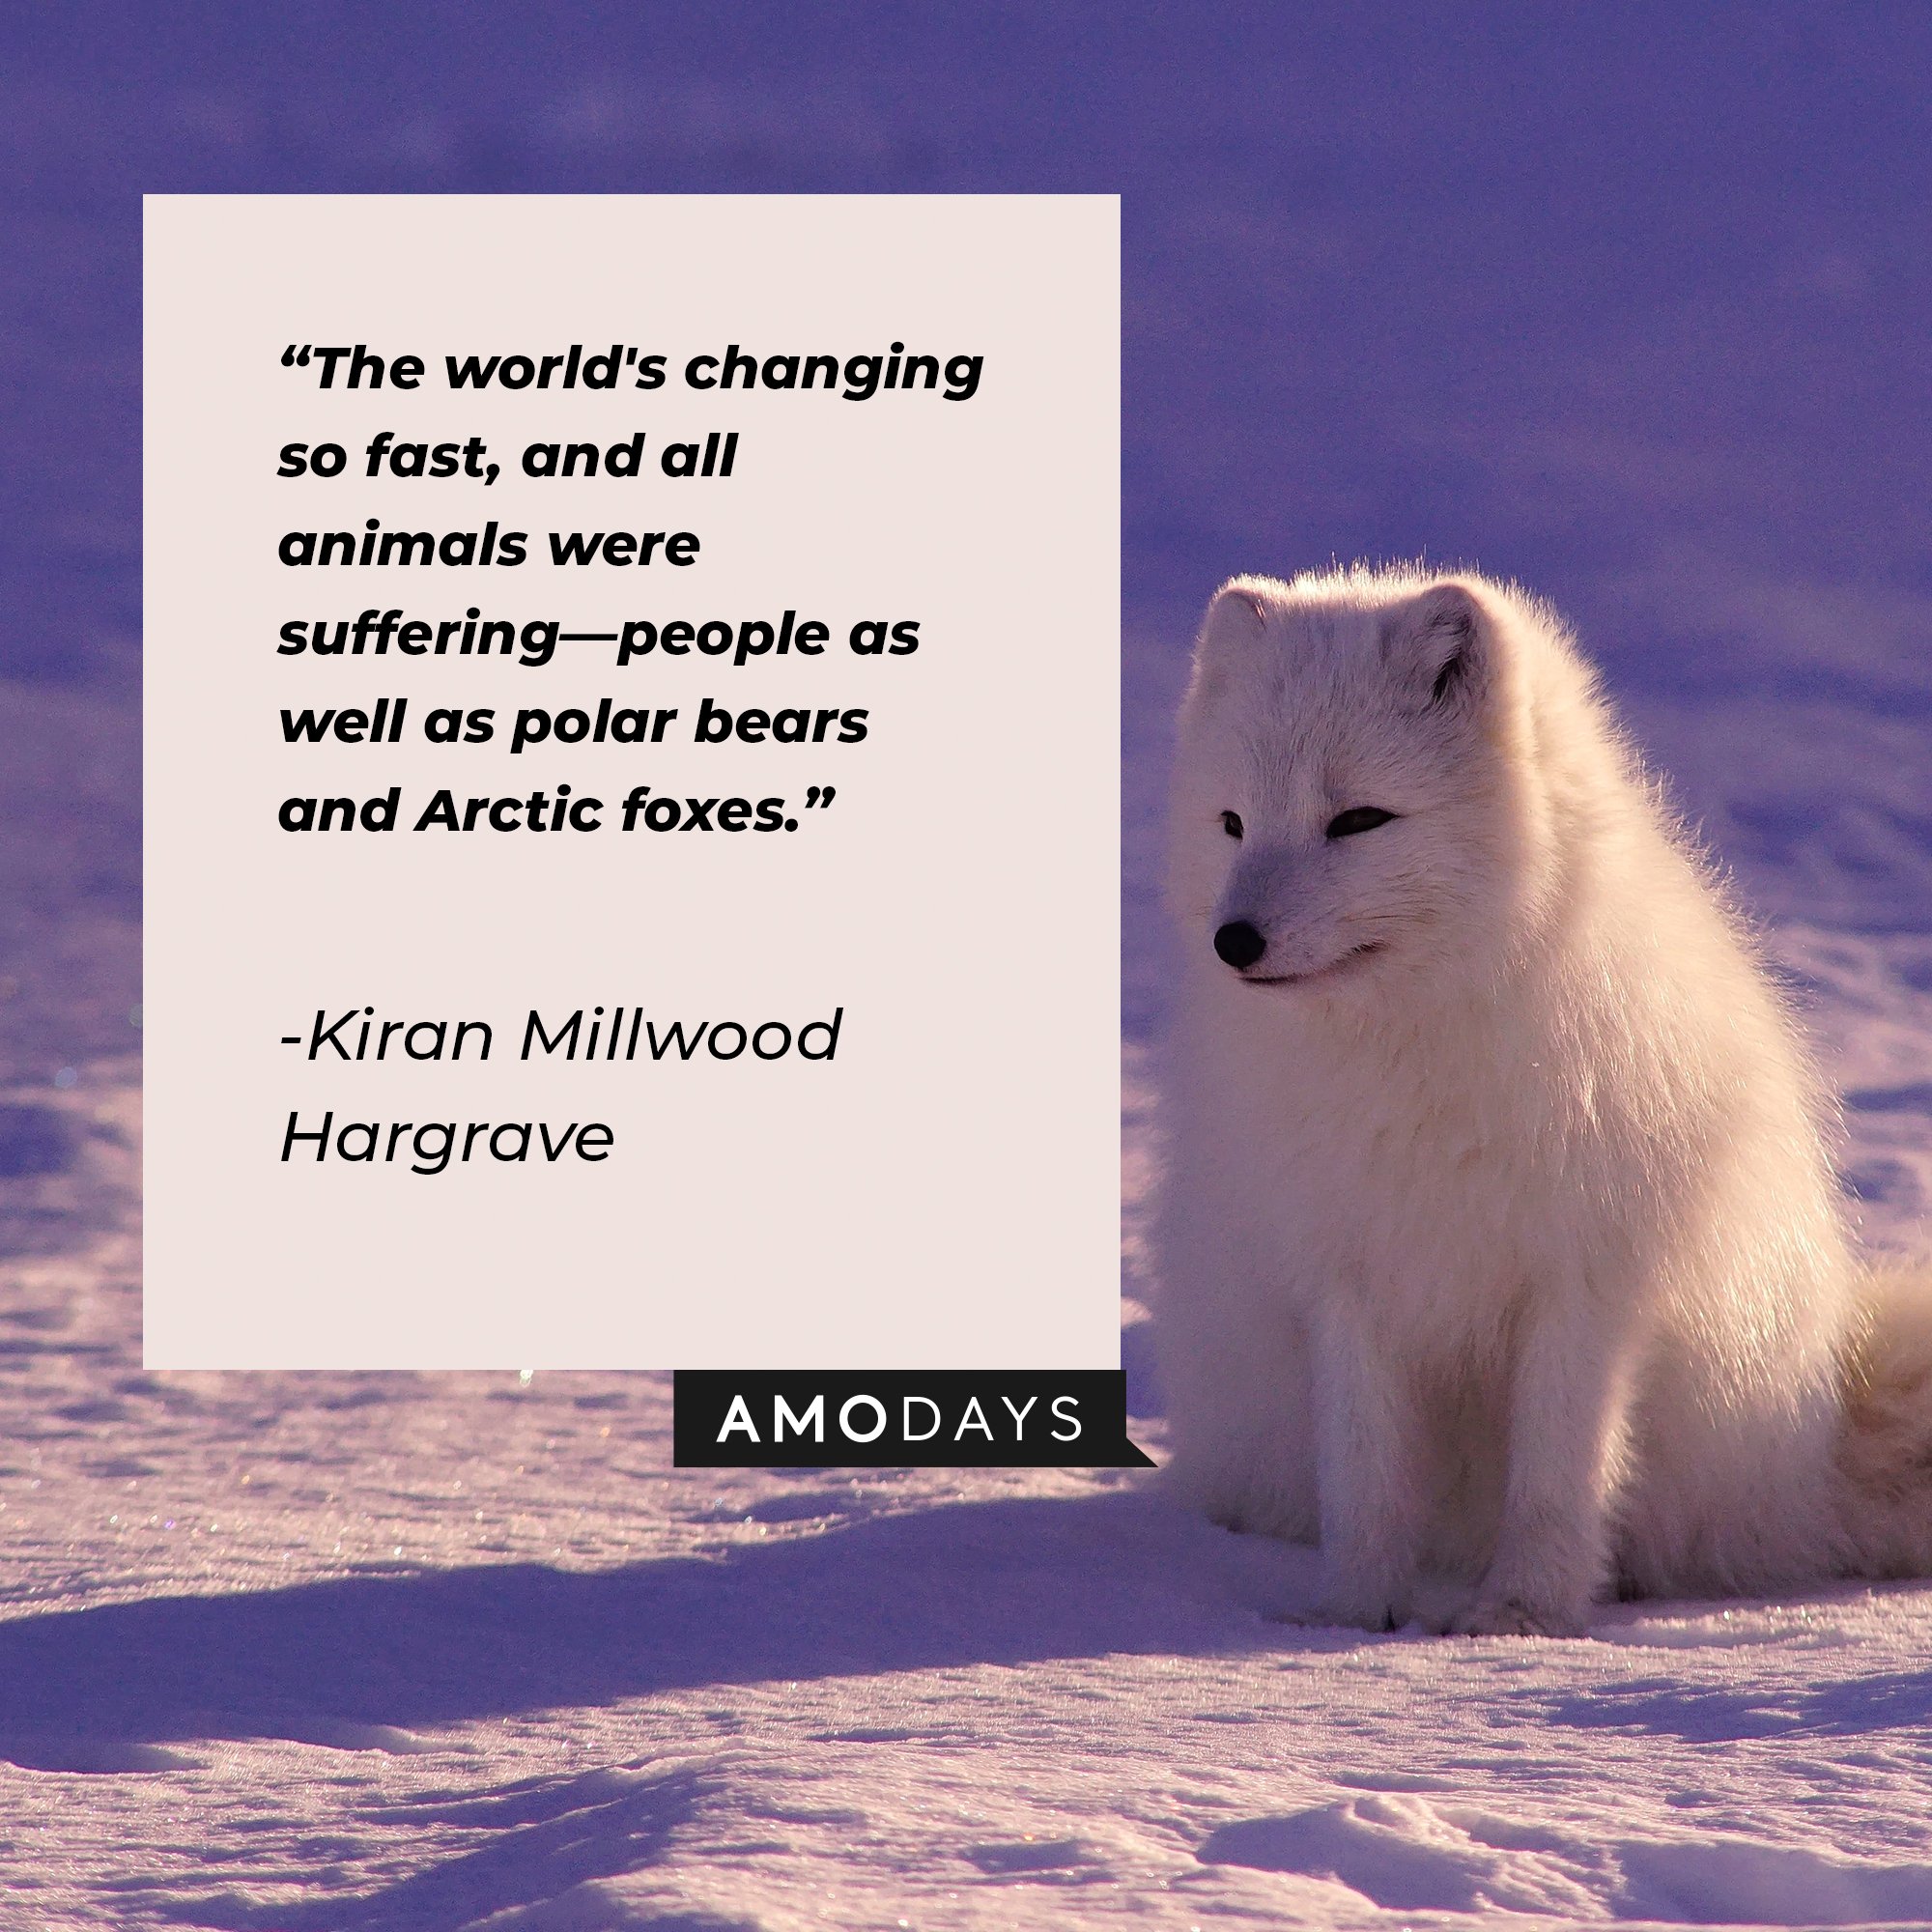 Kiran Millwood Hargrave’s quote: “The world's changing so fast, and all animals were suffering—people as well as polar bears and Arctic foxes.”| Image: AmoDays 